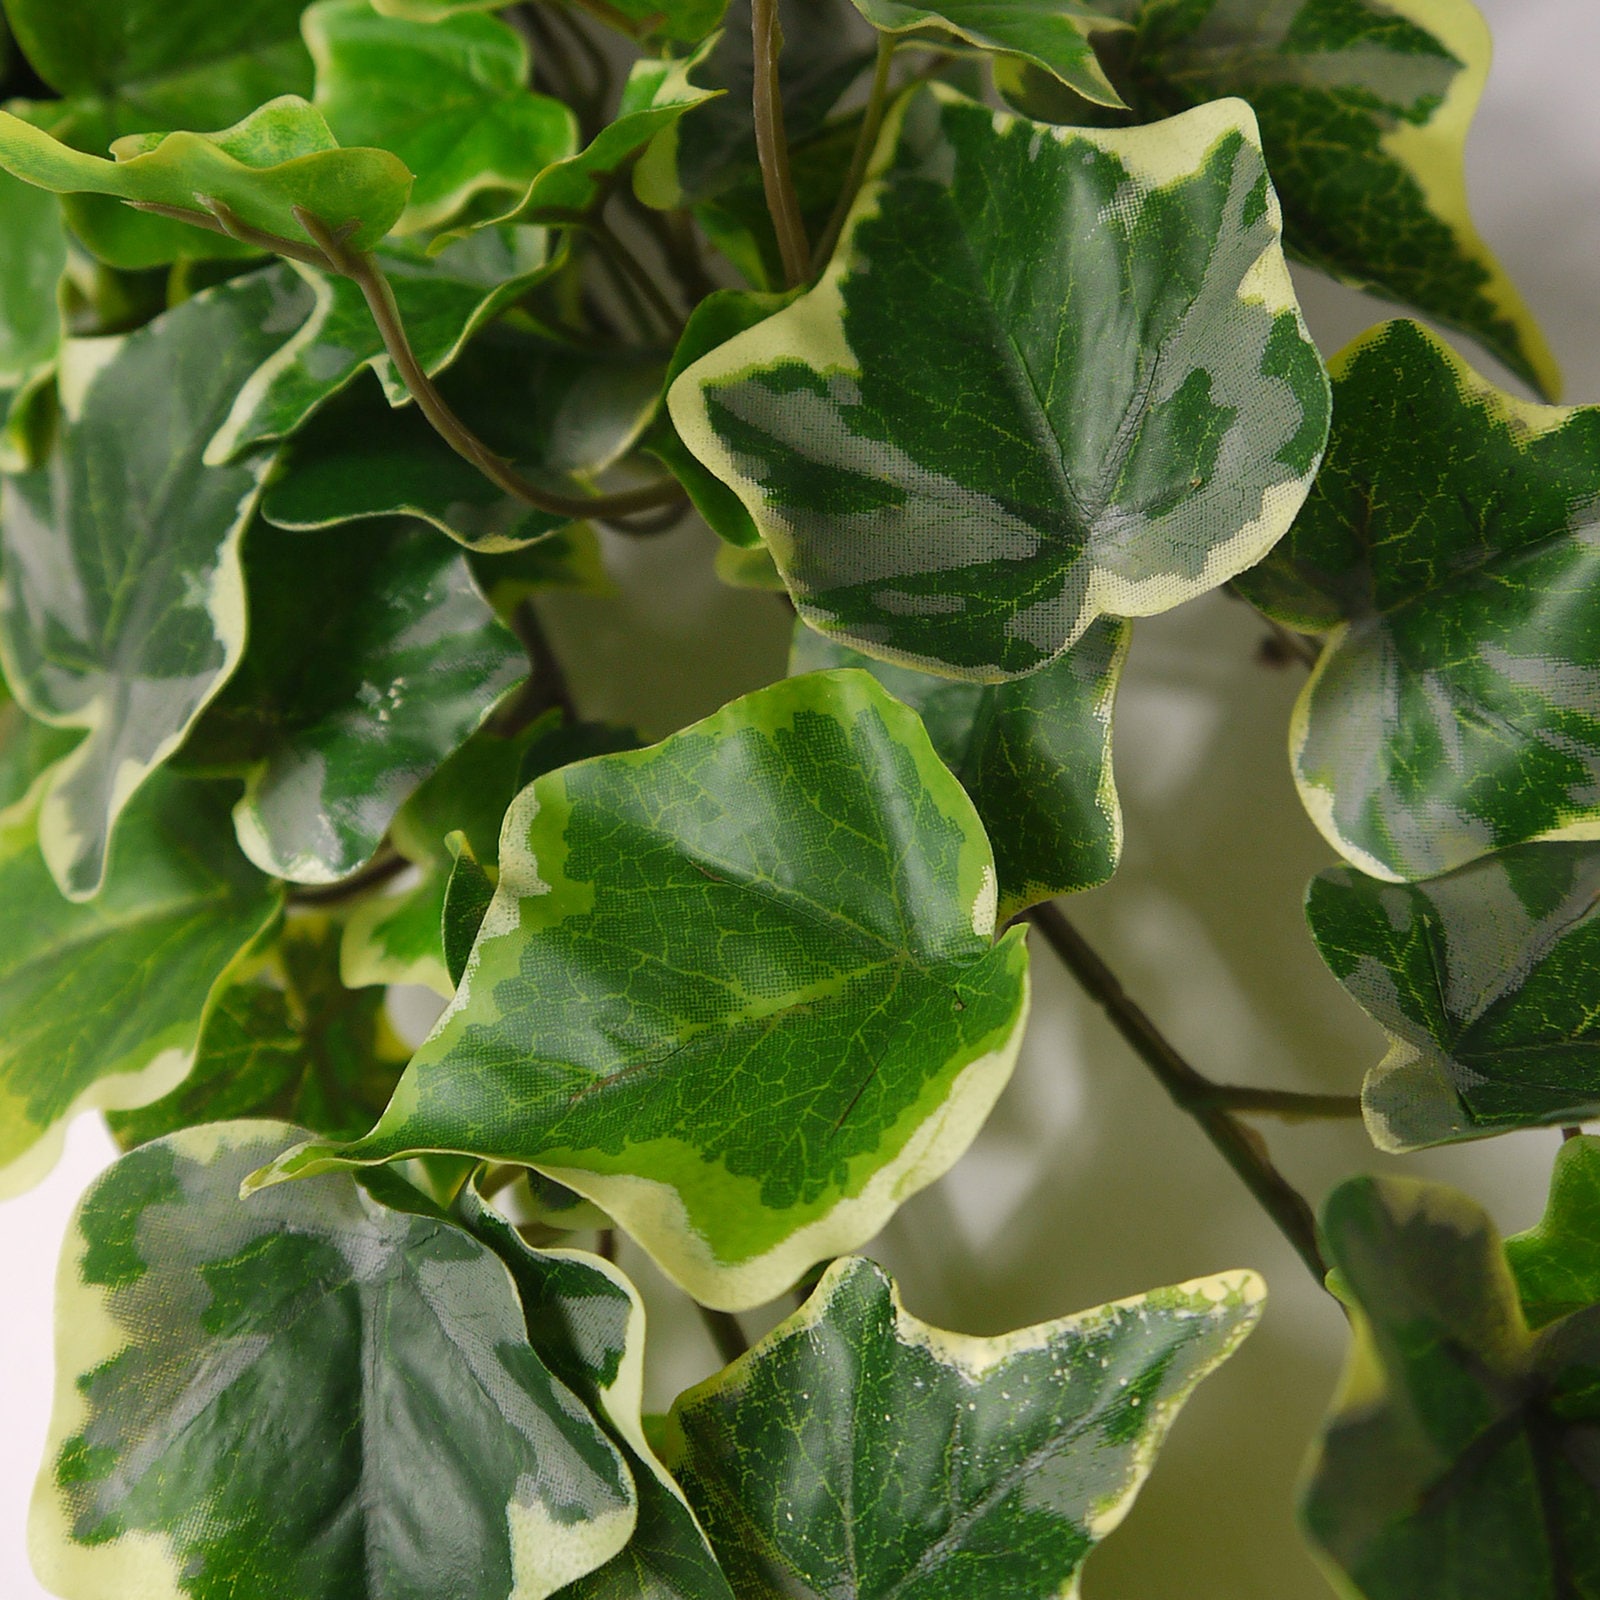 Artificial Ivy Trailing Plant